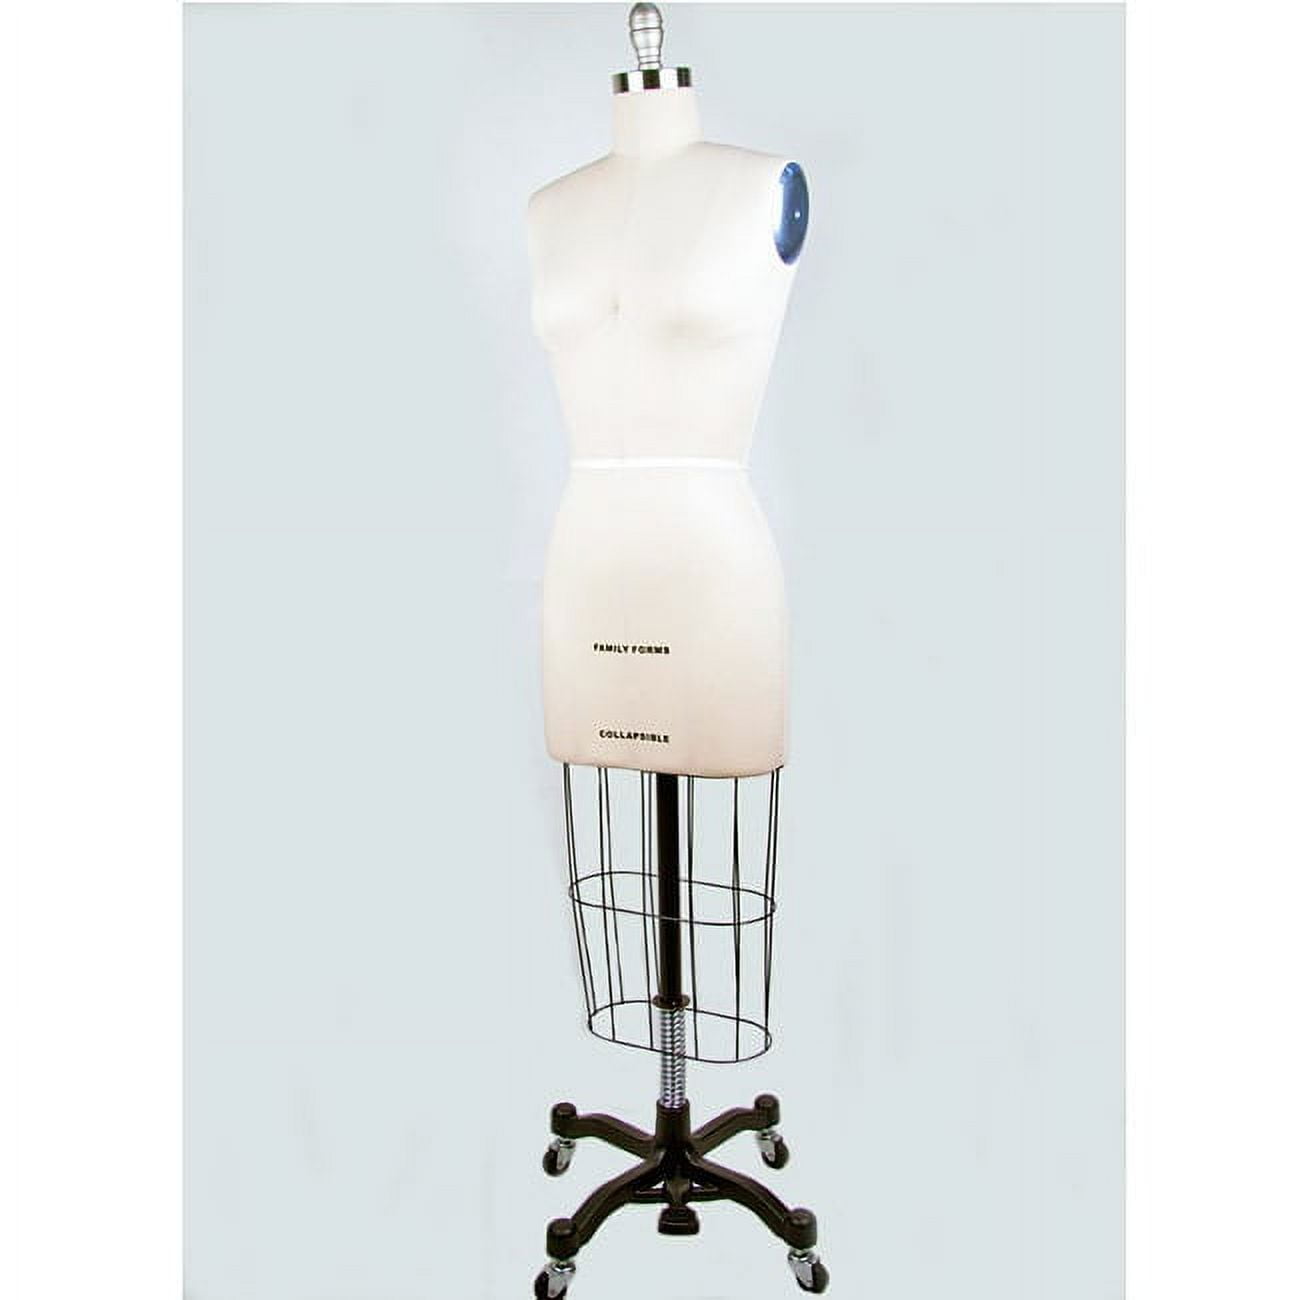 FDW Mannequin Dress Form Mannequin Torso 60-67 inch Height Adjustable Clothing Forms Easy to Move for Clothing Dress Jewelry Display with Tripod